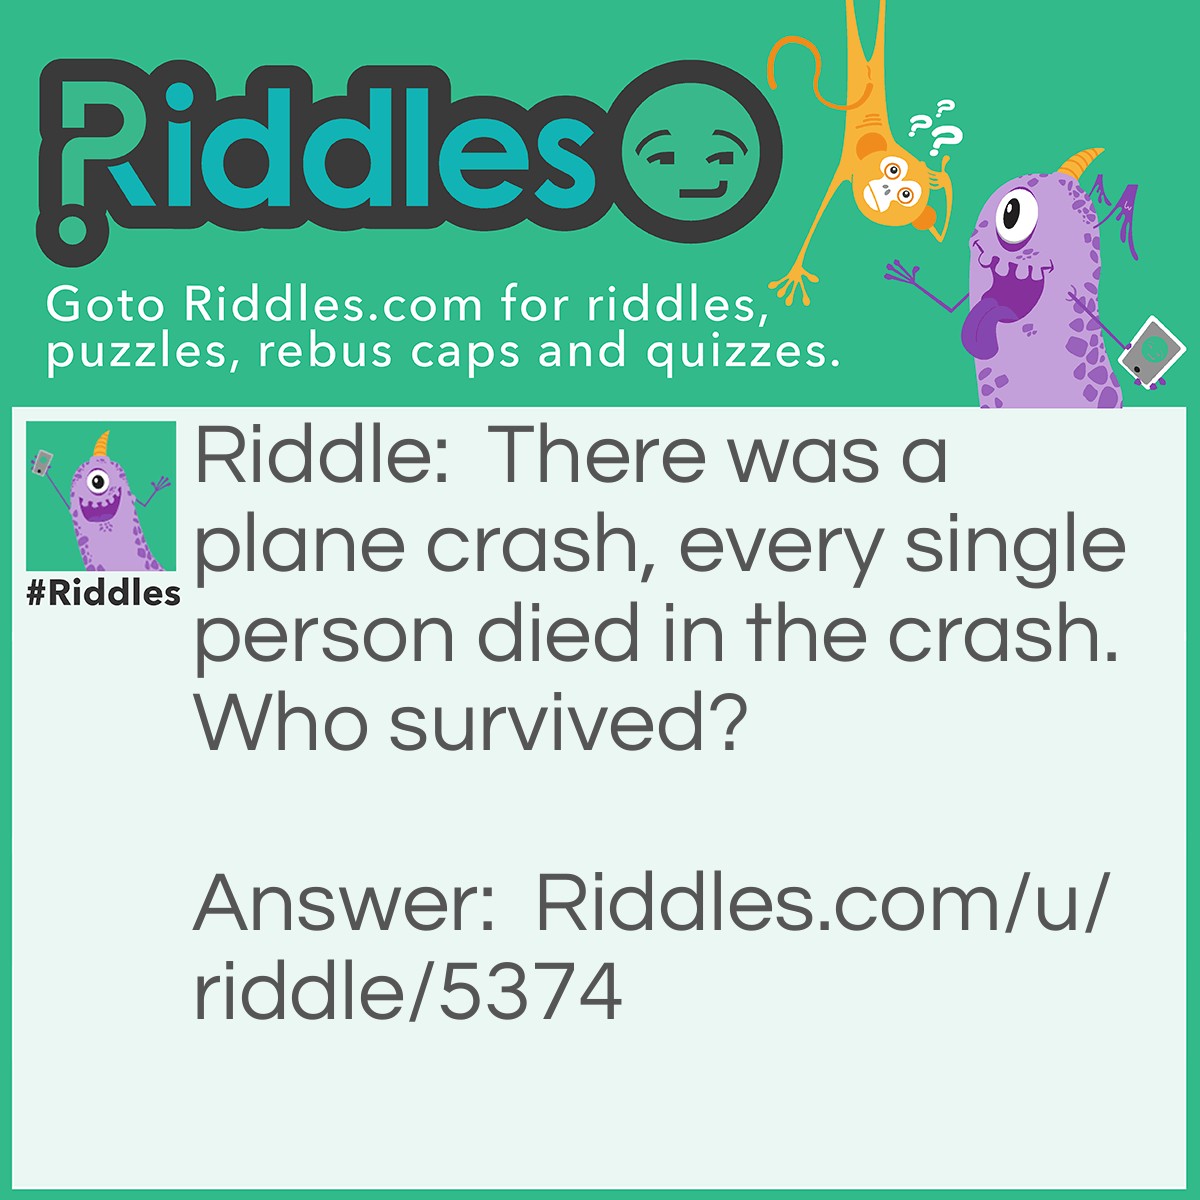 Riddle: There was a plane crash, every single person died in the crash. Who survived? Answer: Every SINGLE person died. Not the couples.